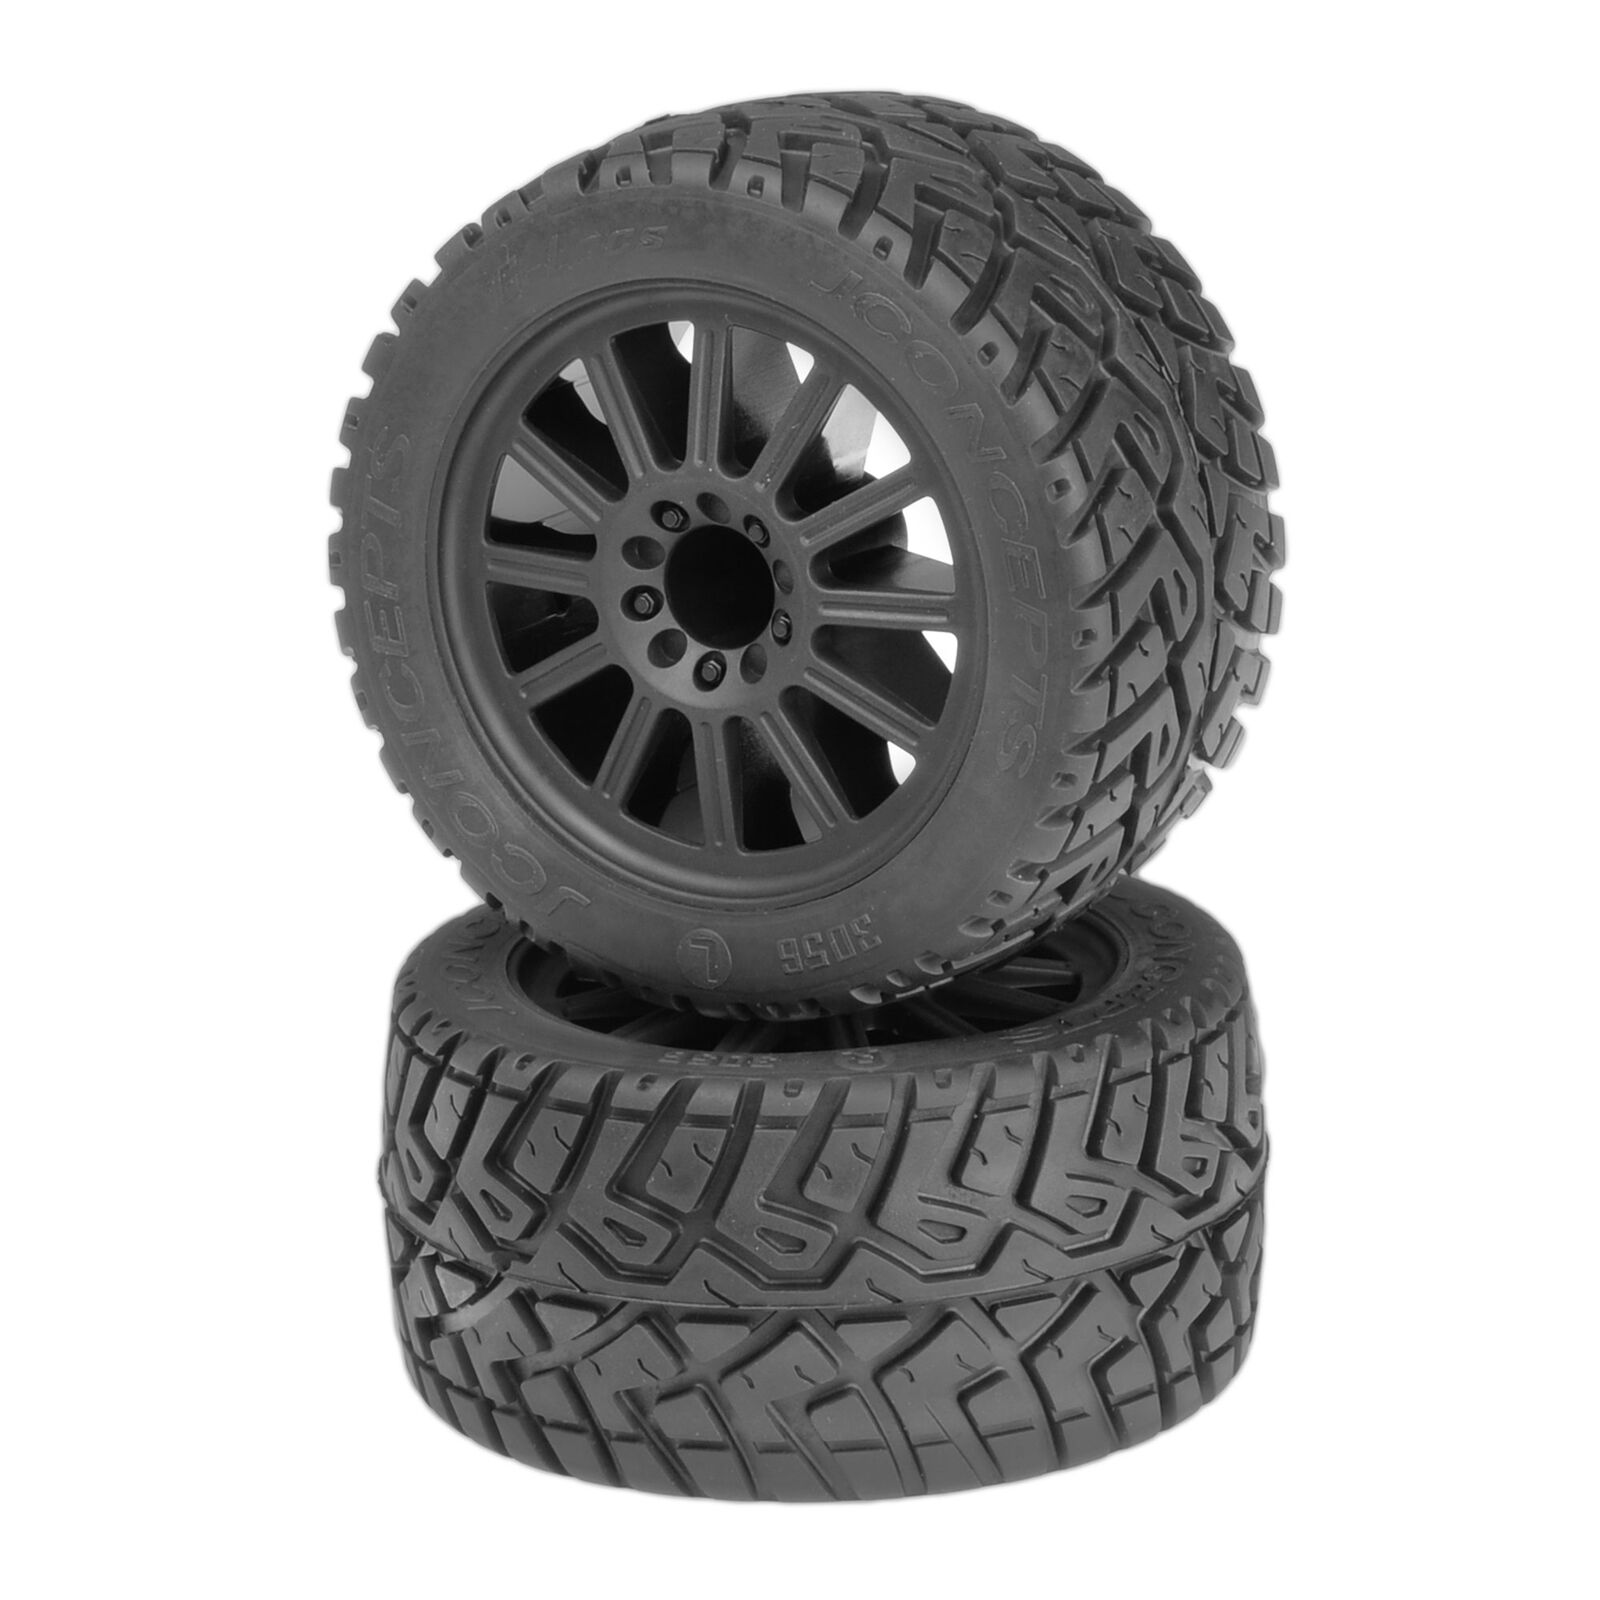 1/10 G-Locs 2.8” Rear Pre-Mounted Monster Truck Tires, Yellow Compound (2): TRA 2WD Stampede/ 2WD Rustler